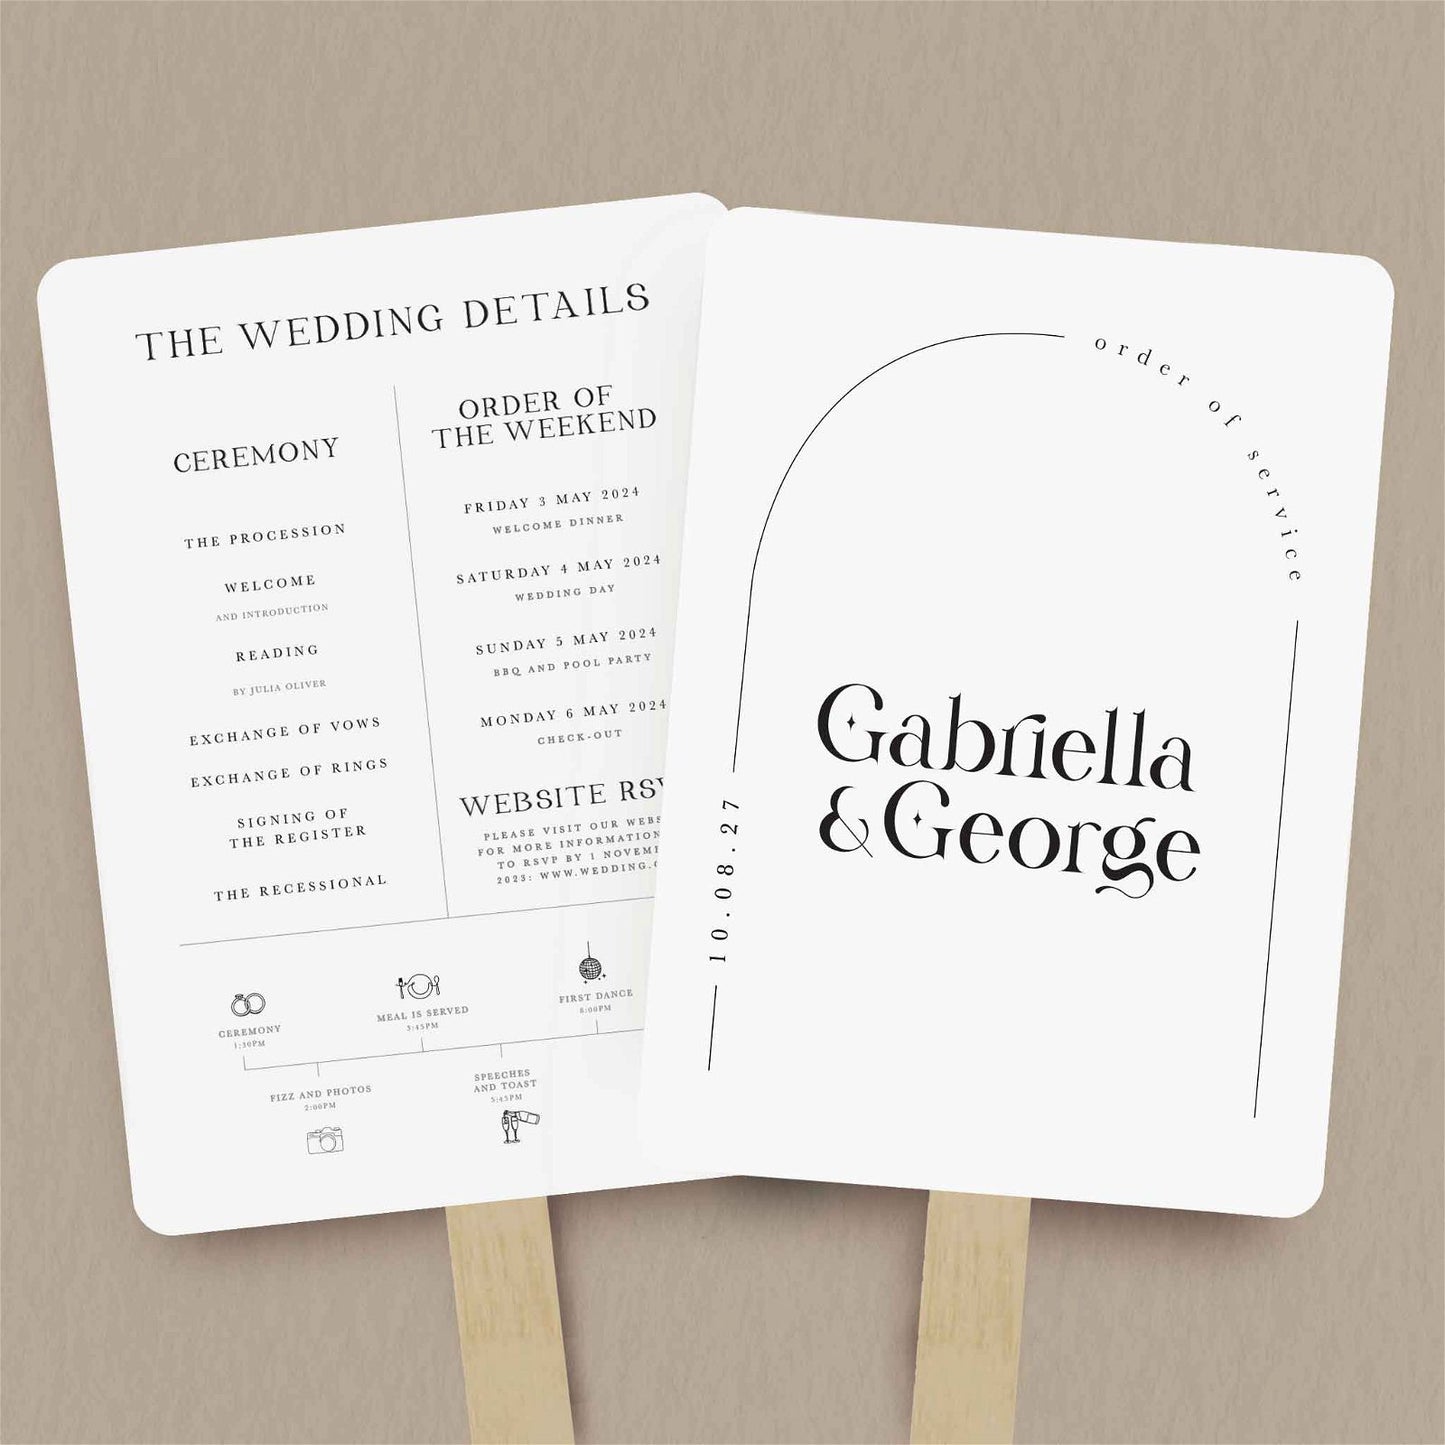 Gabriella Order Of Service  Ivy and Gold Wedding Stationery   